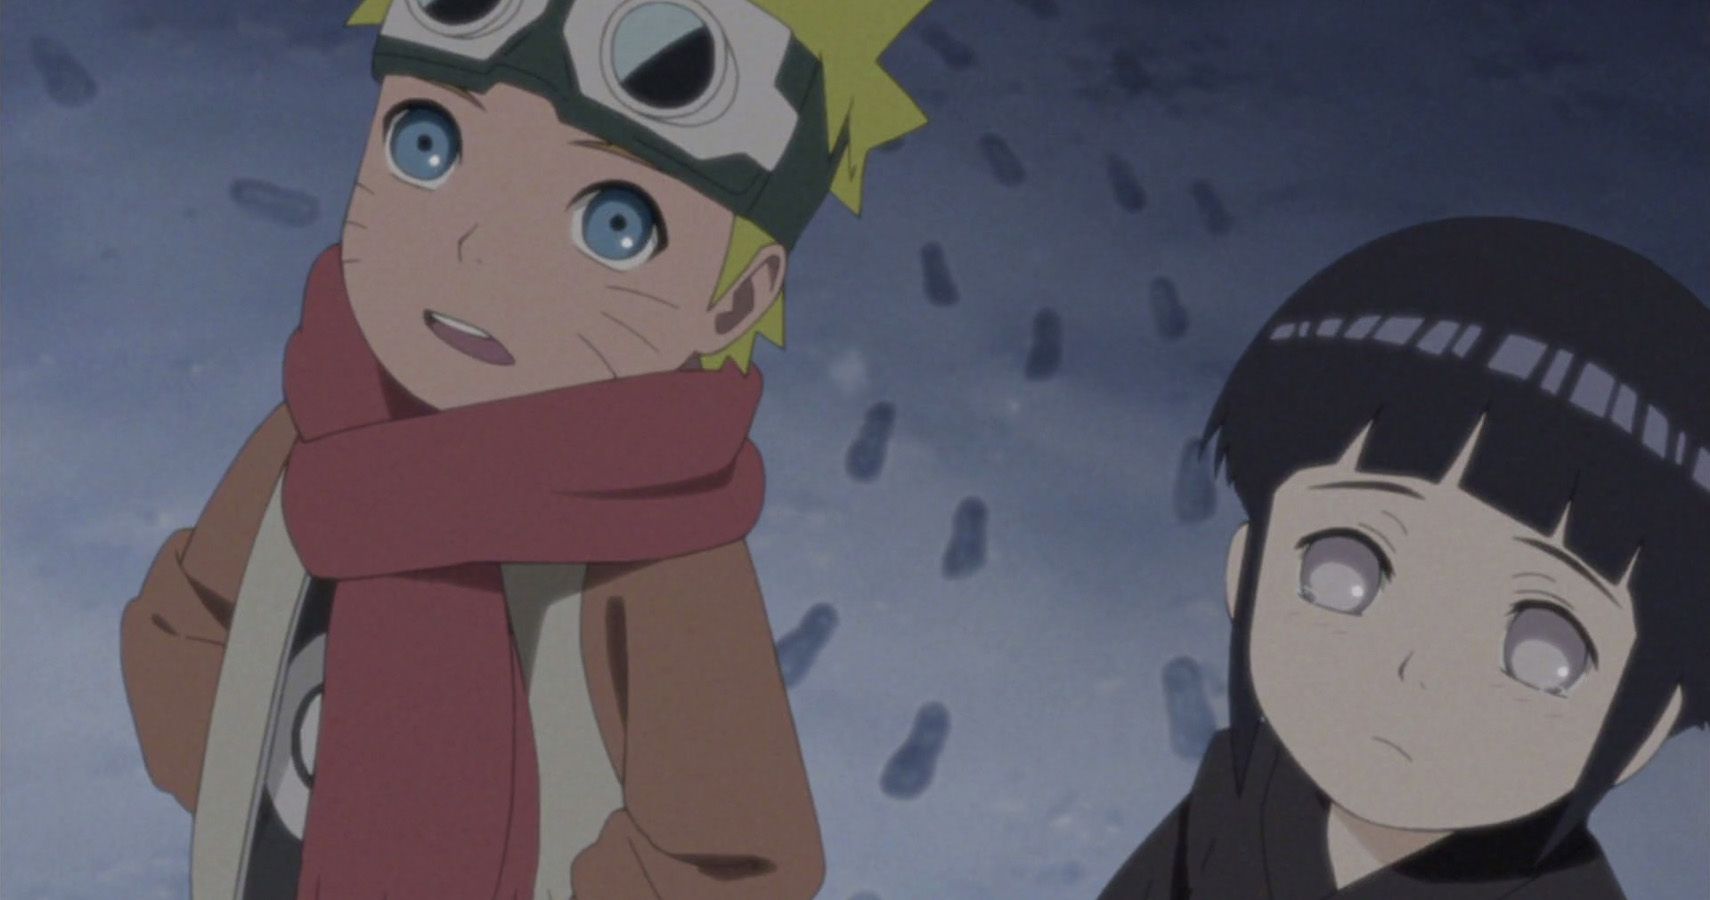 What if Naruto shared Hinata's feelings in part 1 and they started dating?  How would that affect the story? - Quora